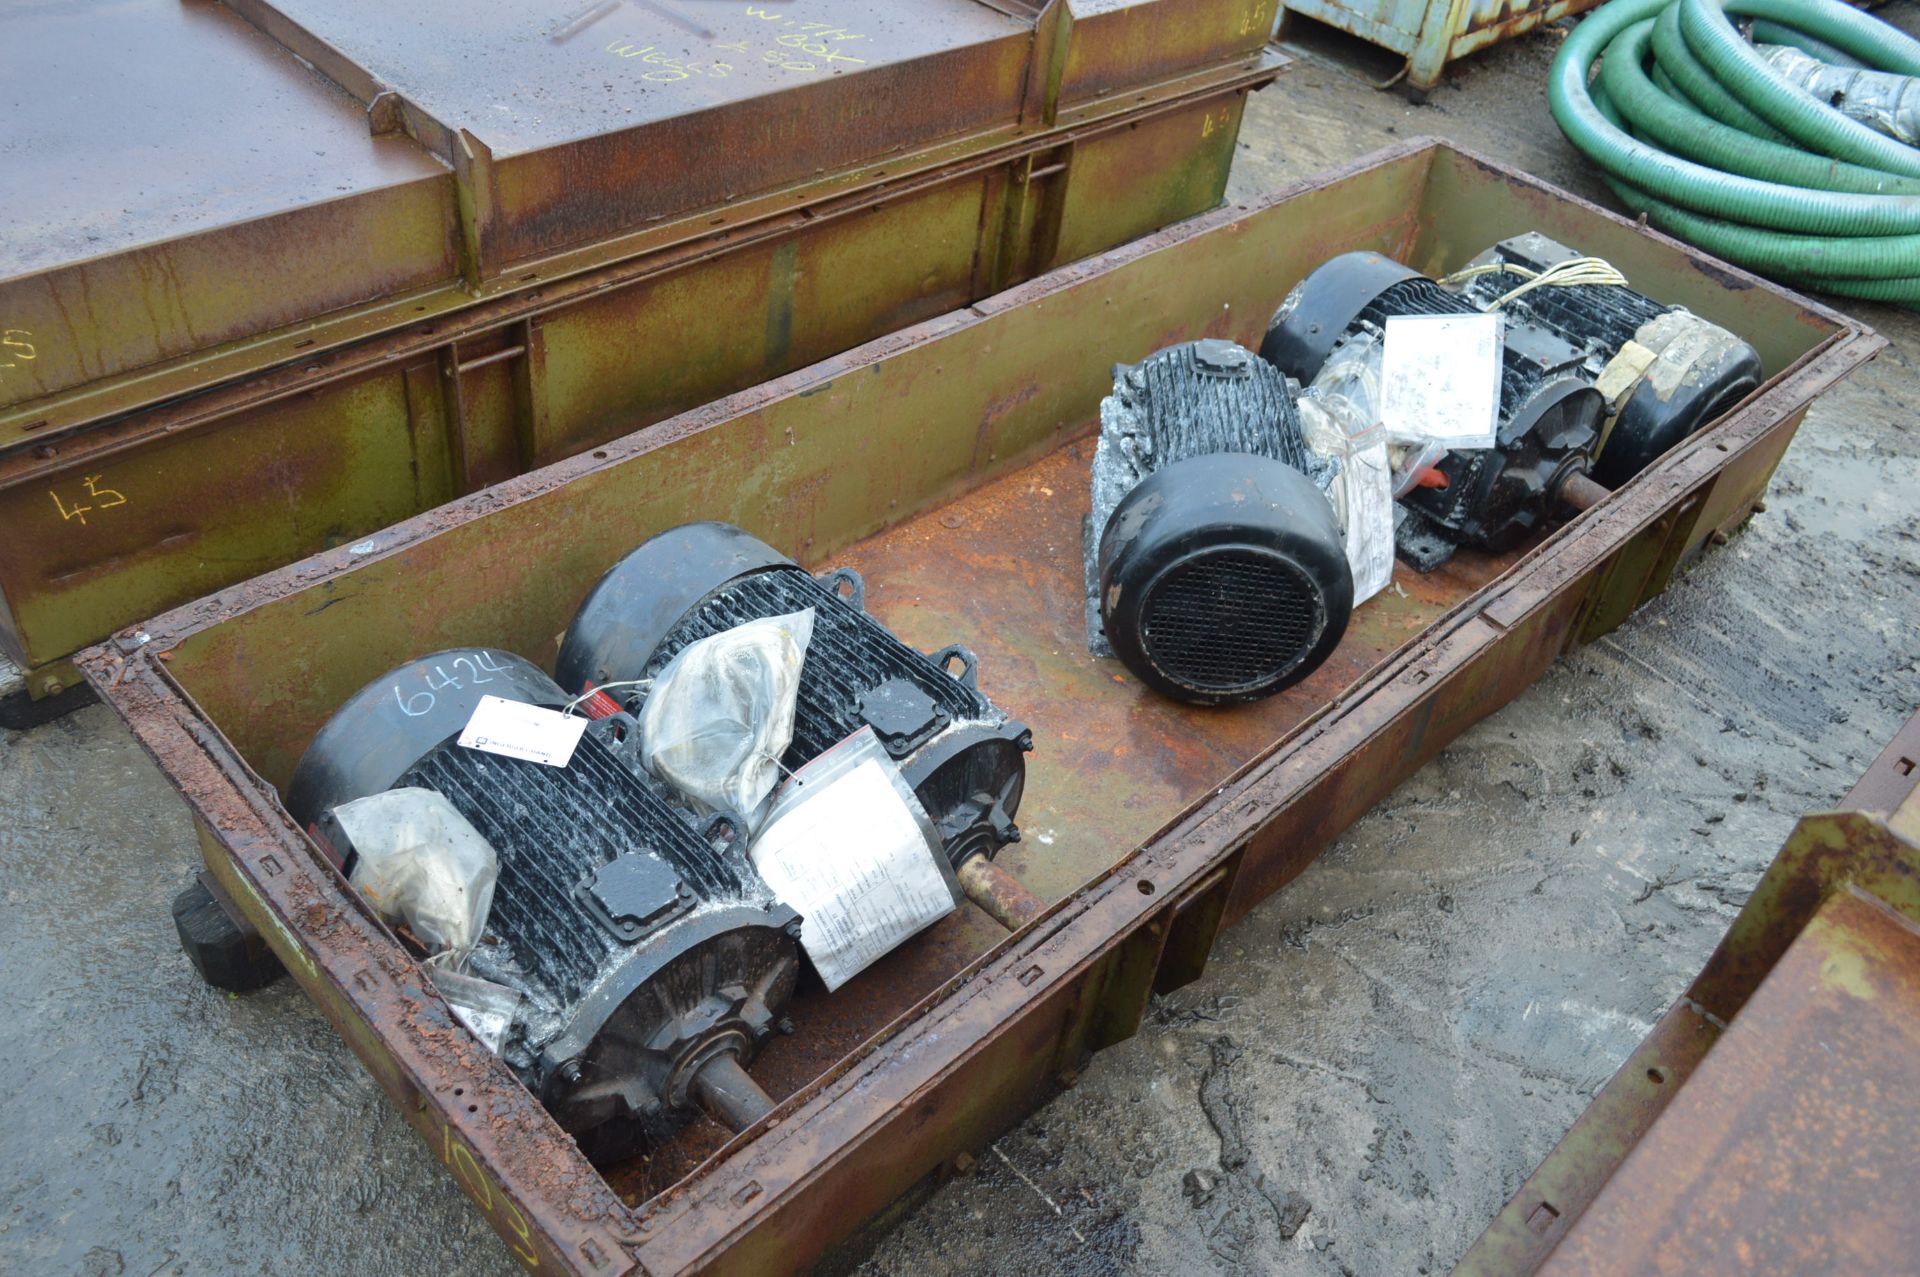 Five Electric Motors, in missile box (missile box